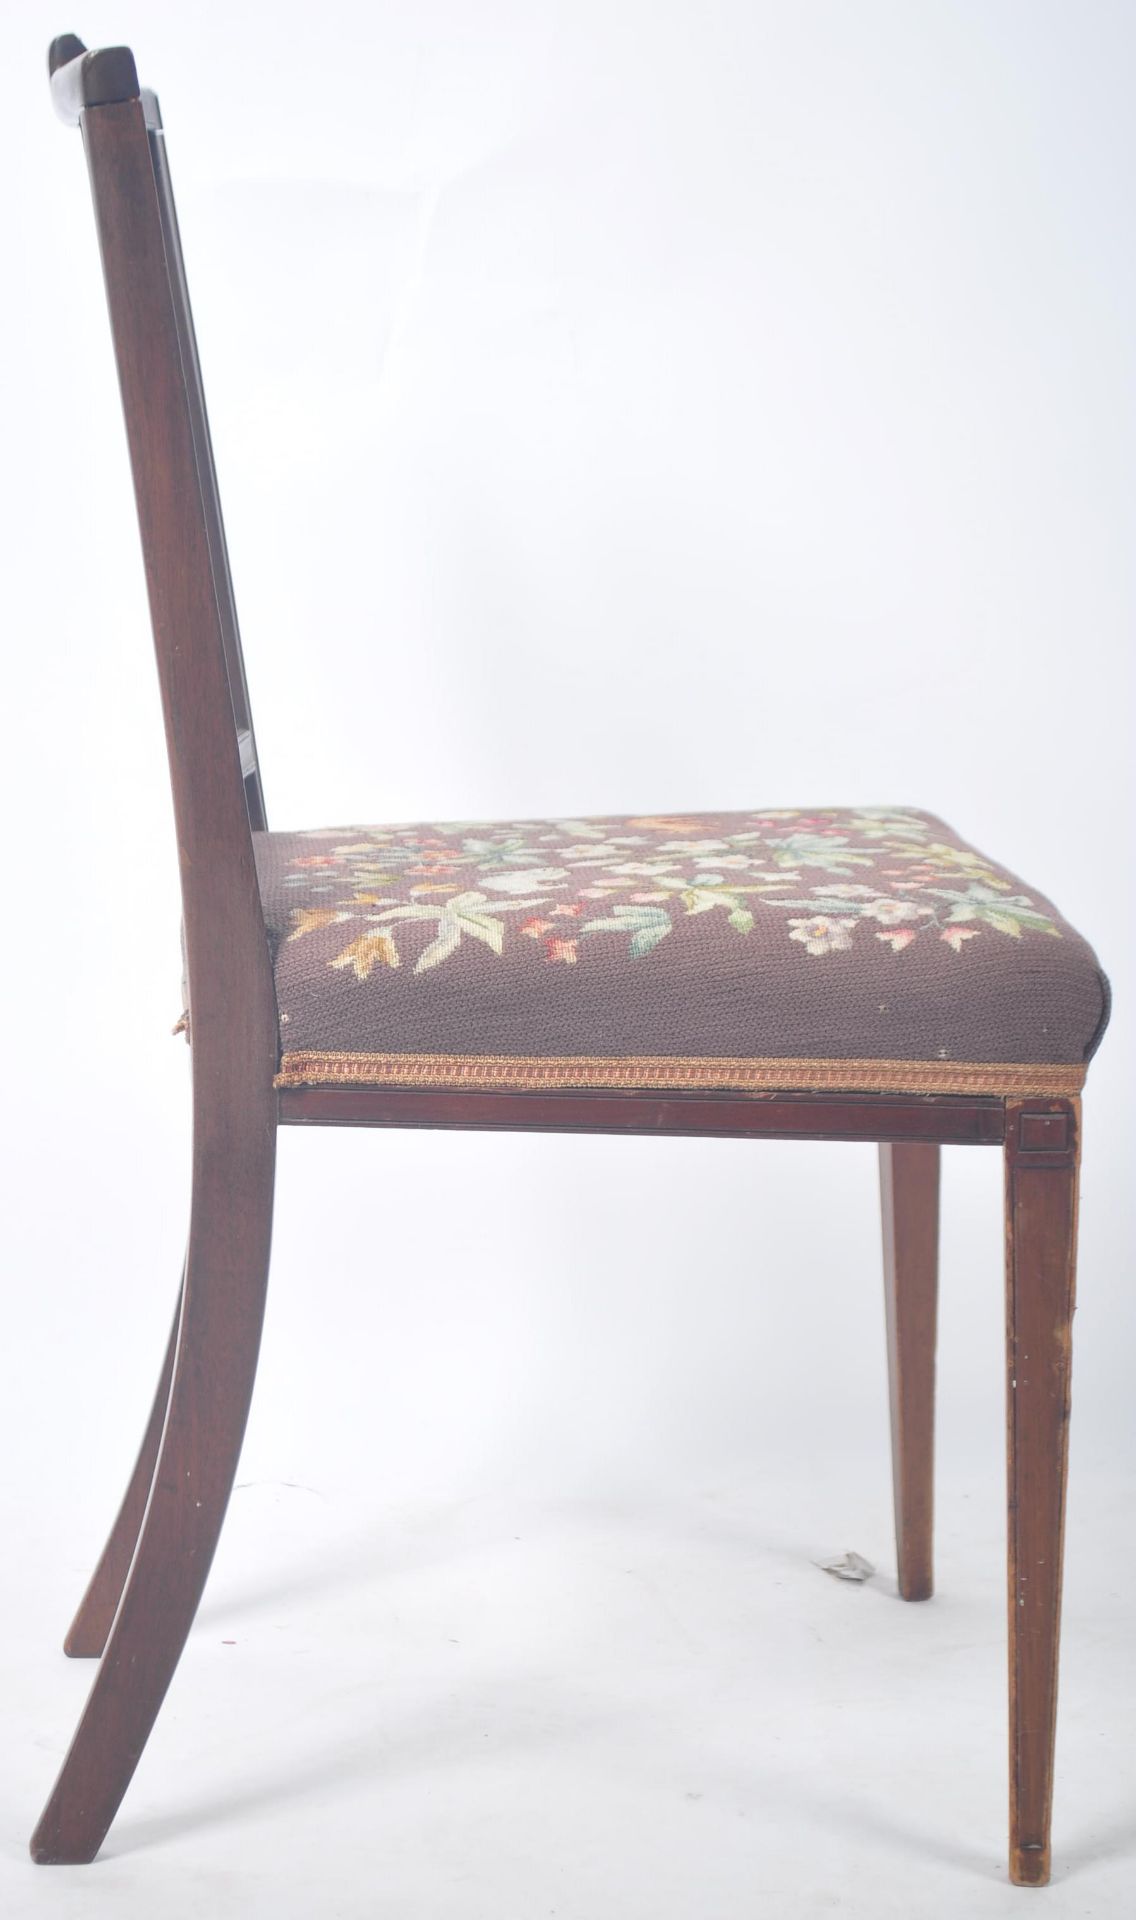 19TH CENTURY GEORGIAN MAHOGANY & TAPESTRY DINING CHAIR - Image 5 of 8